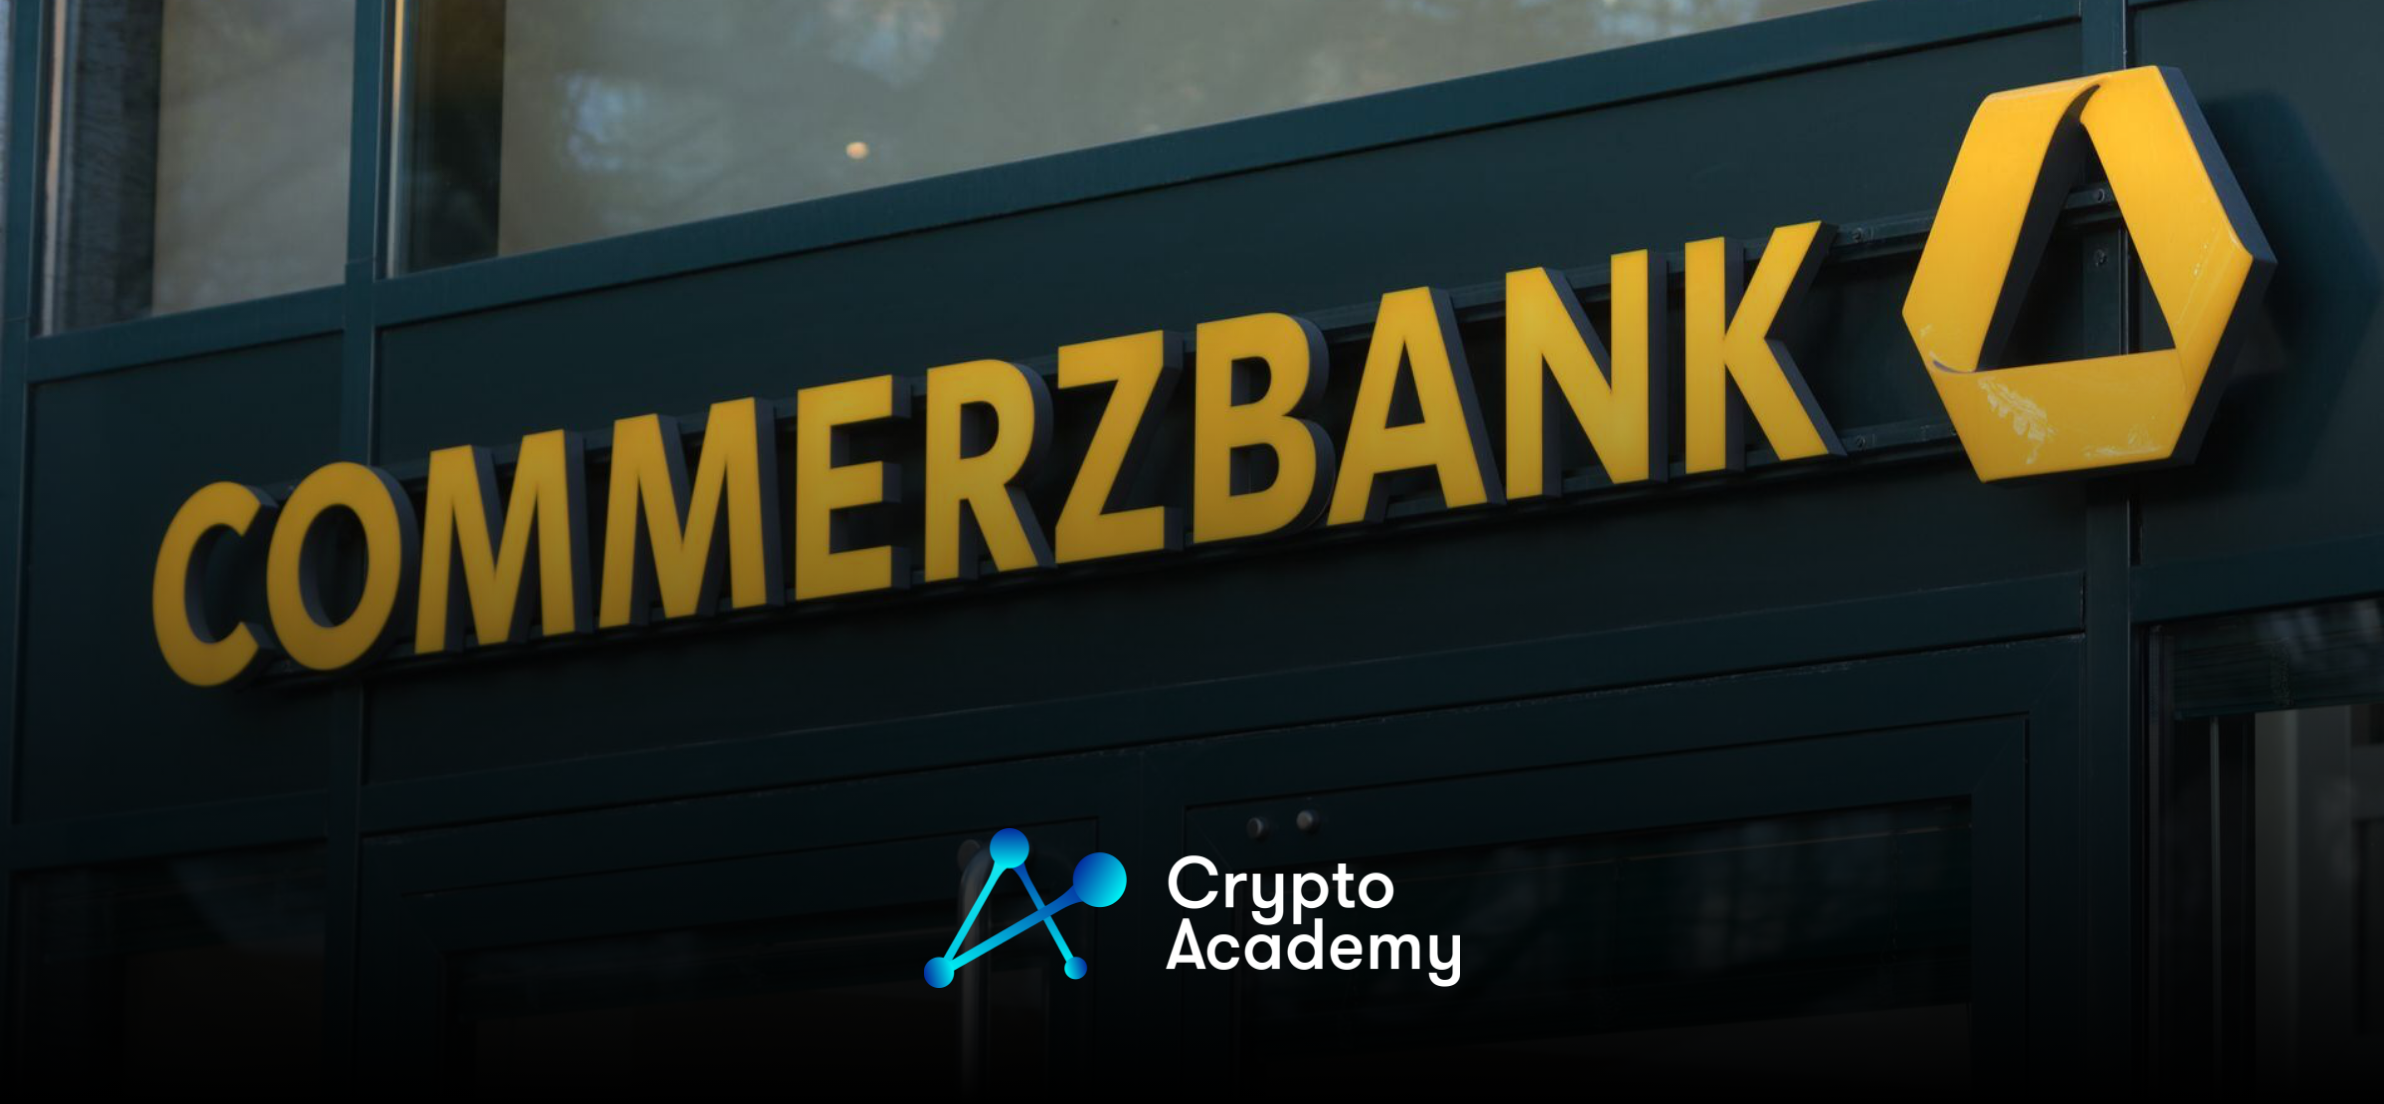 Santander and Commerzbank Launch Crypto Services in Europe